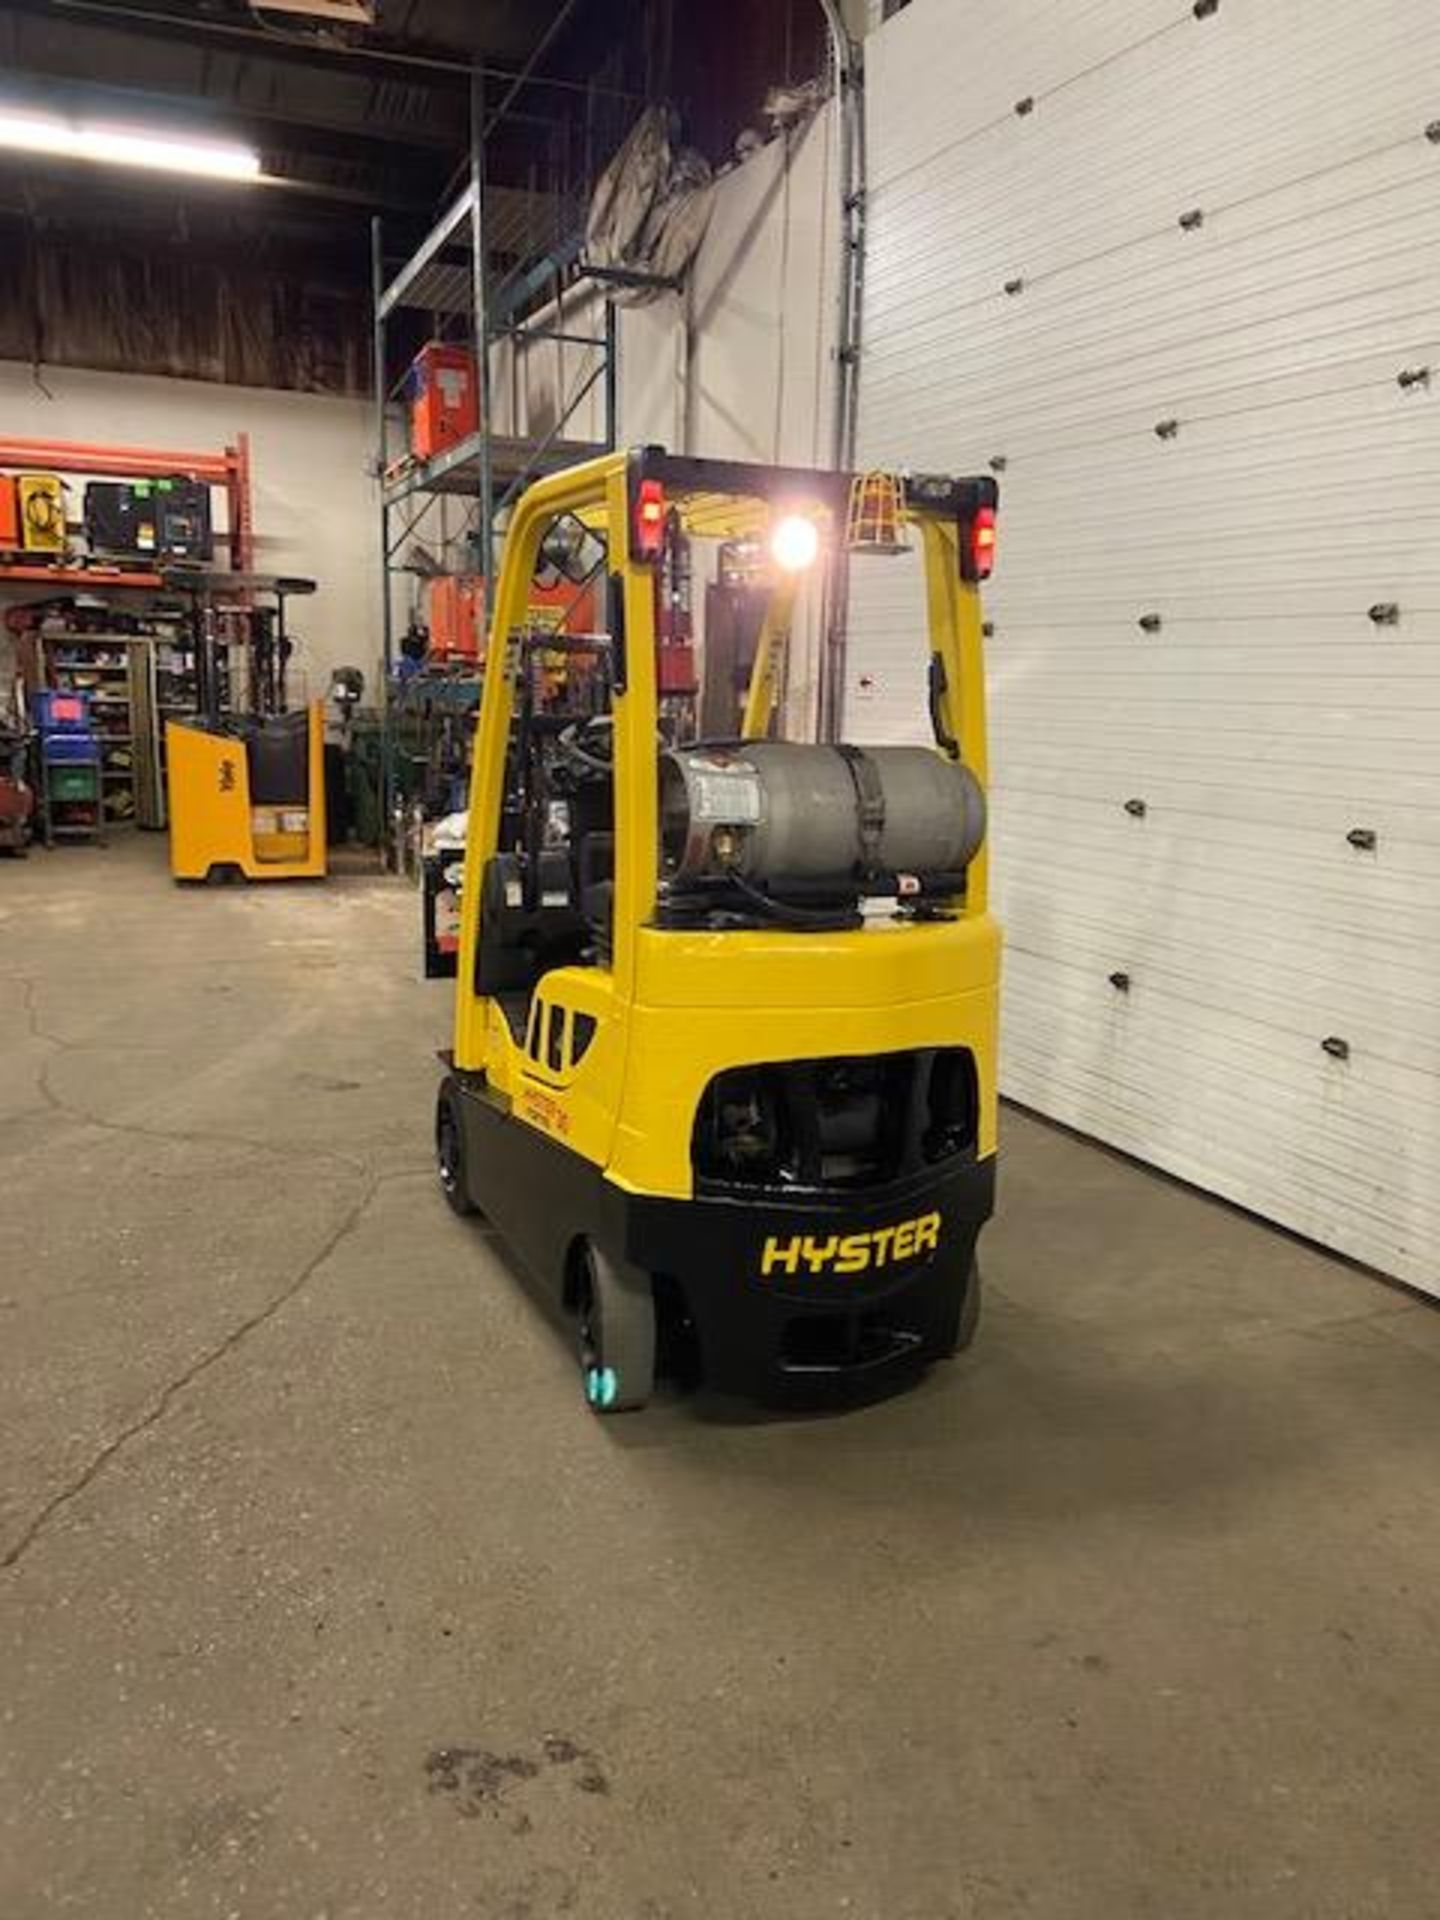 FREE CUSTOMS - 2015 Hyster 3000lbs Capacity Forklift LPG (propane) with sideshift (no propane tank - Image 3 of 3